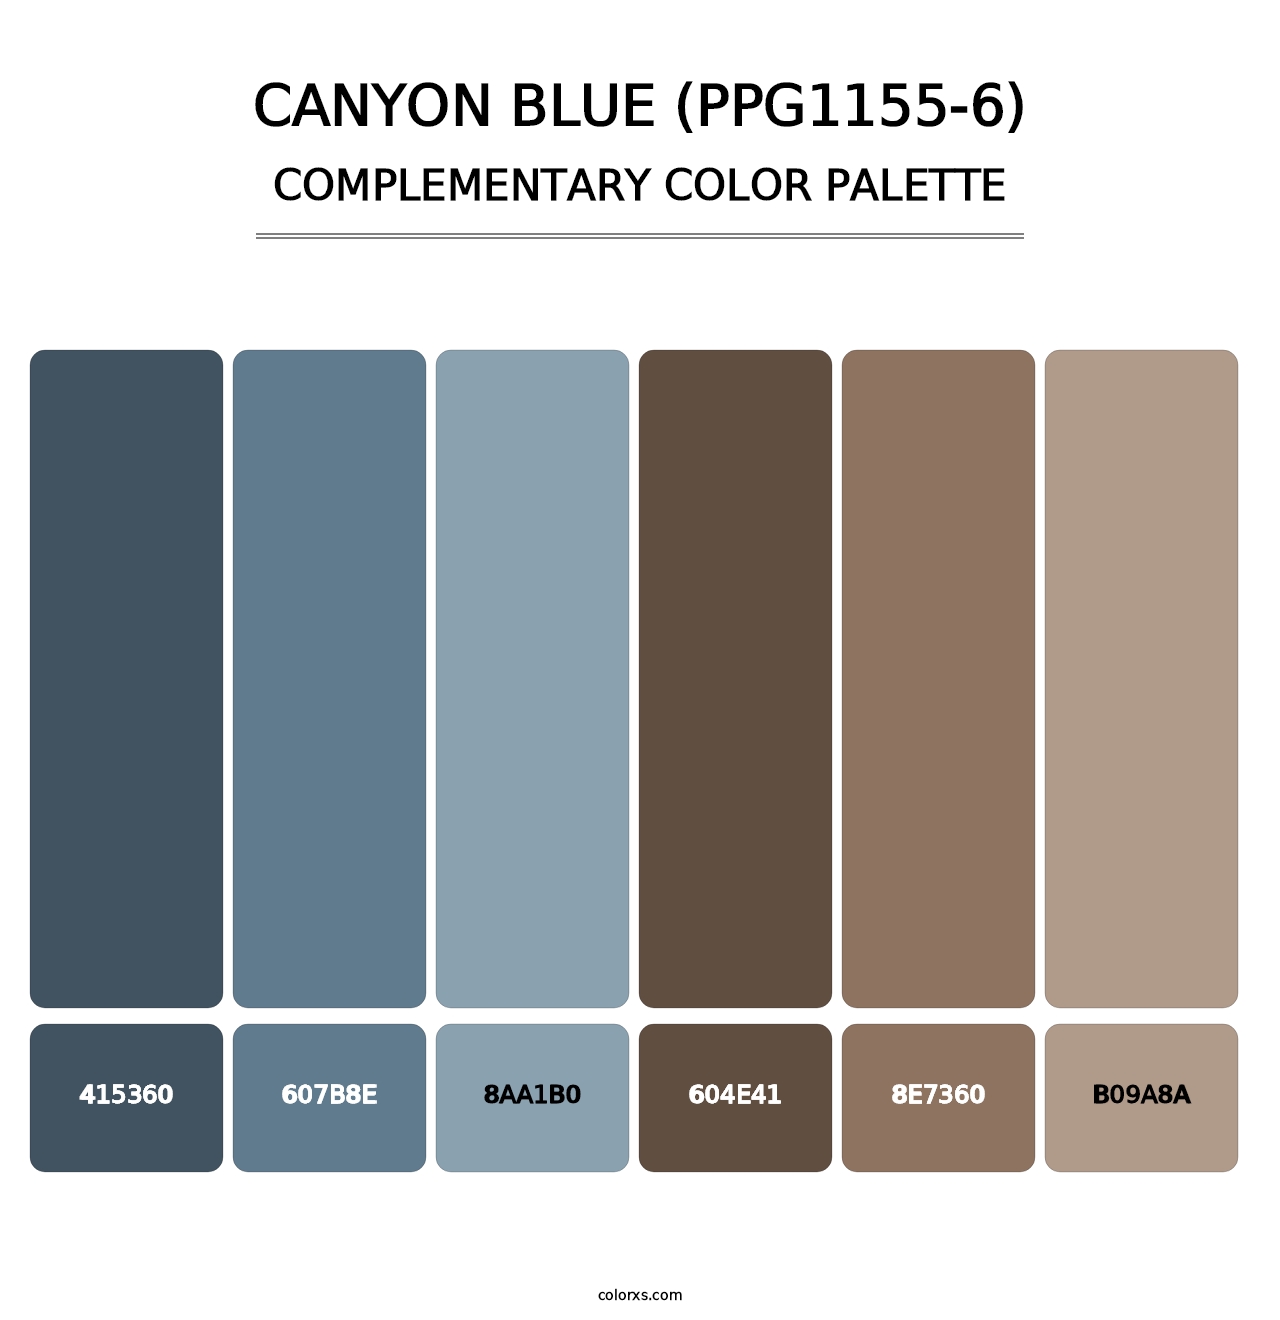 Canyon Blue (PPG1155-6) - Complementary Color Palette